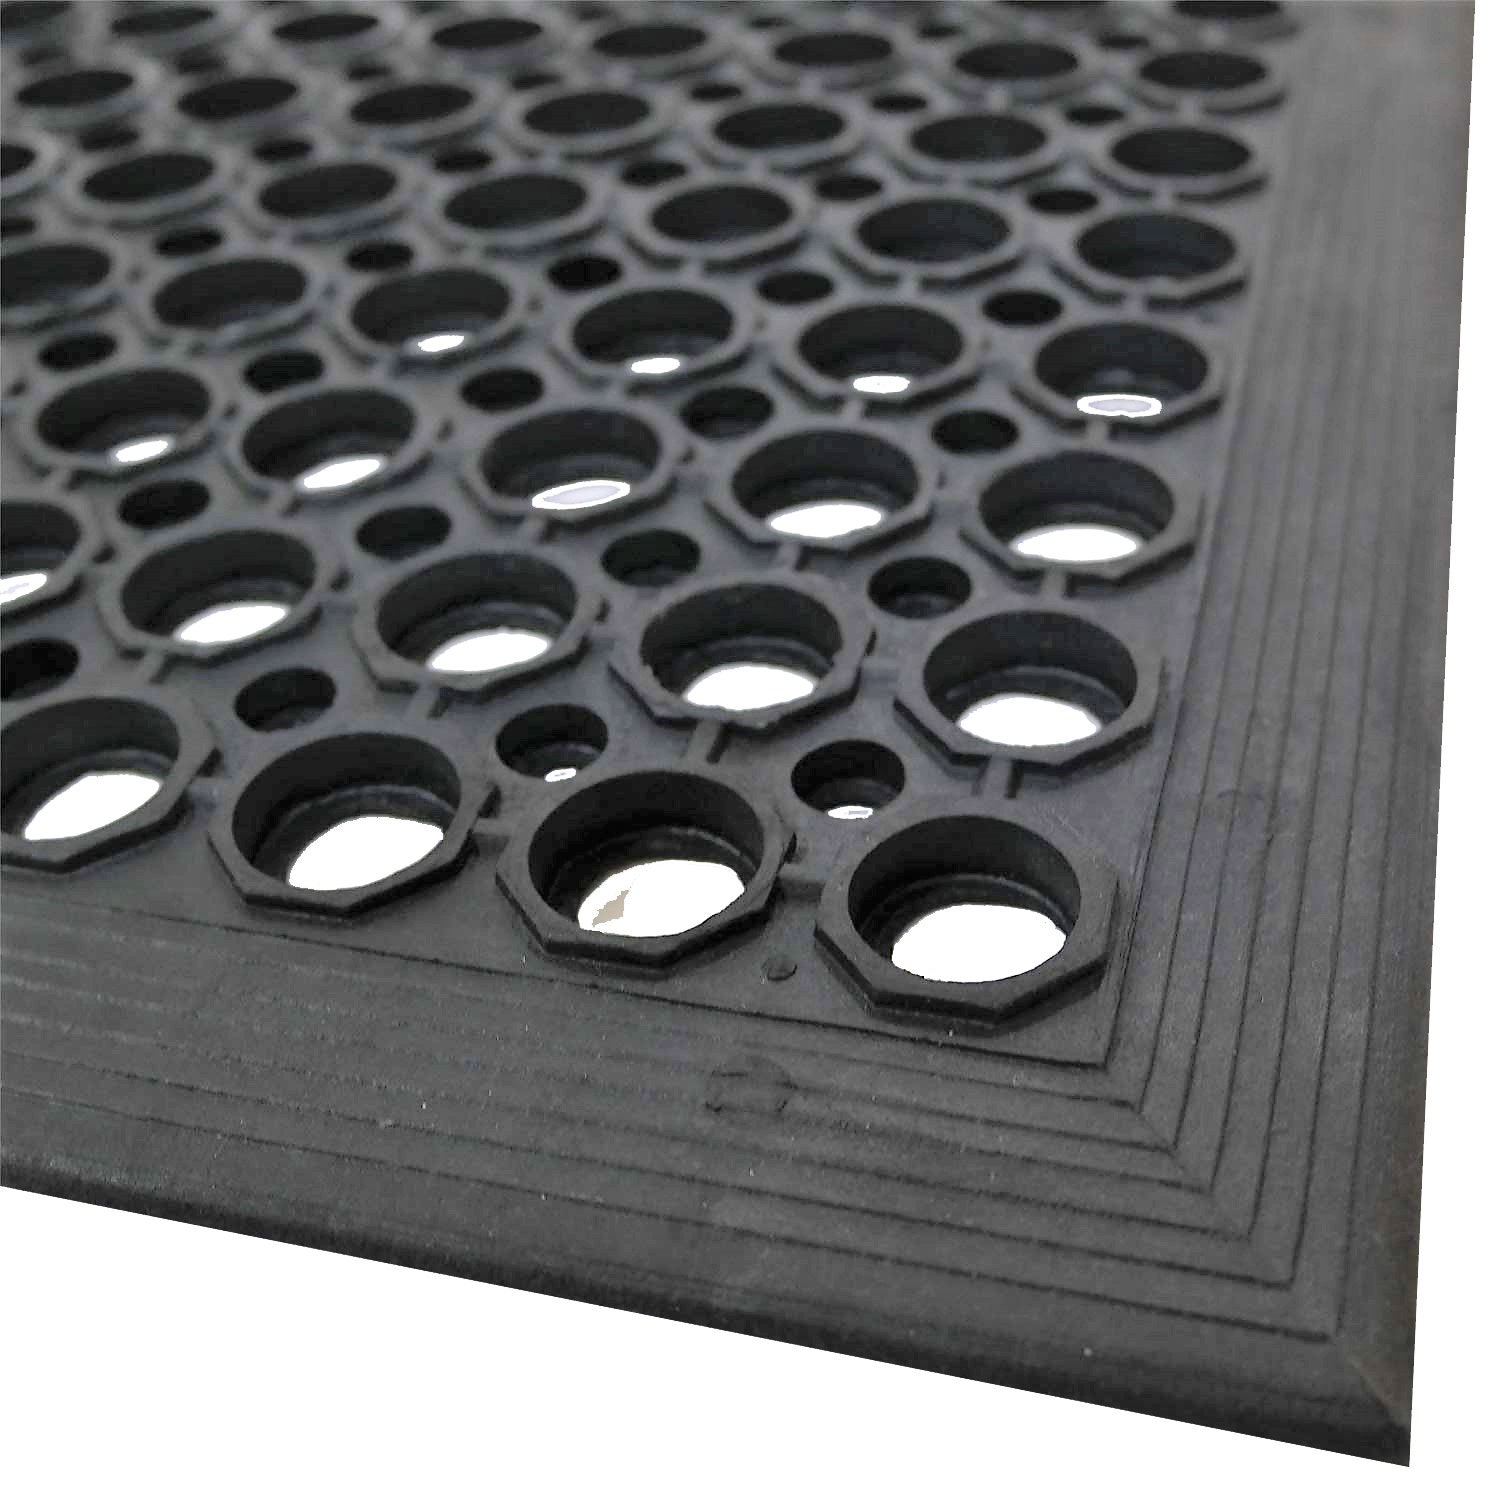 Large Heavy Duty Rubber Ring Matting Entrance Big Mats Safety Workplace  Outdoor